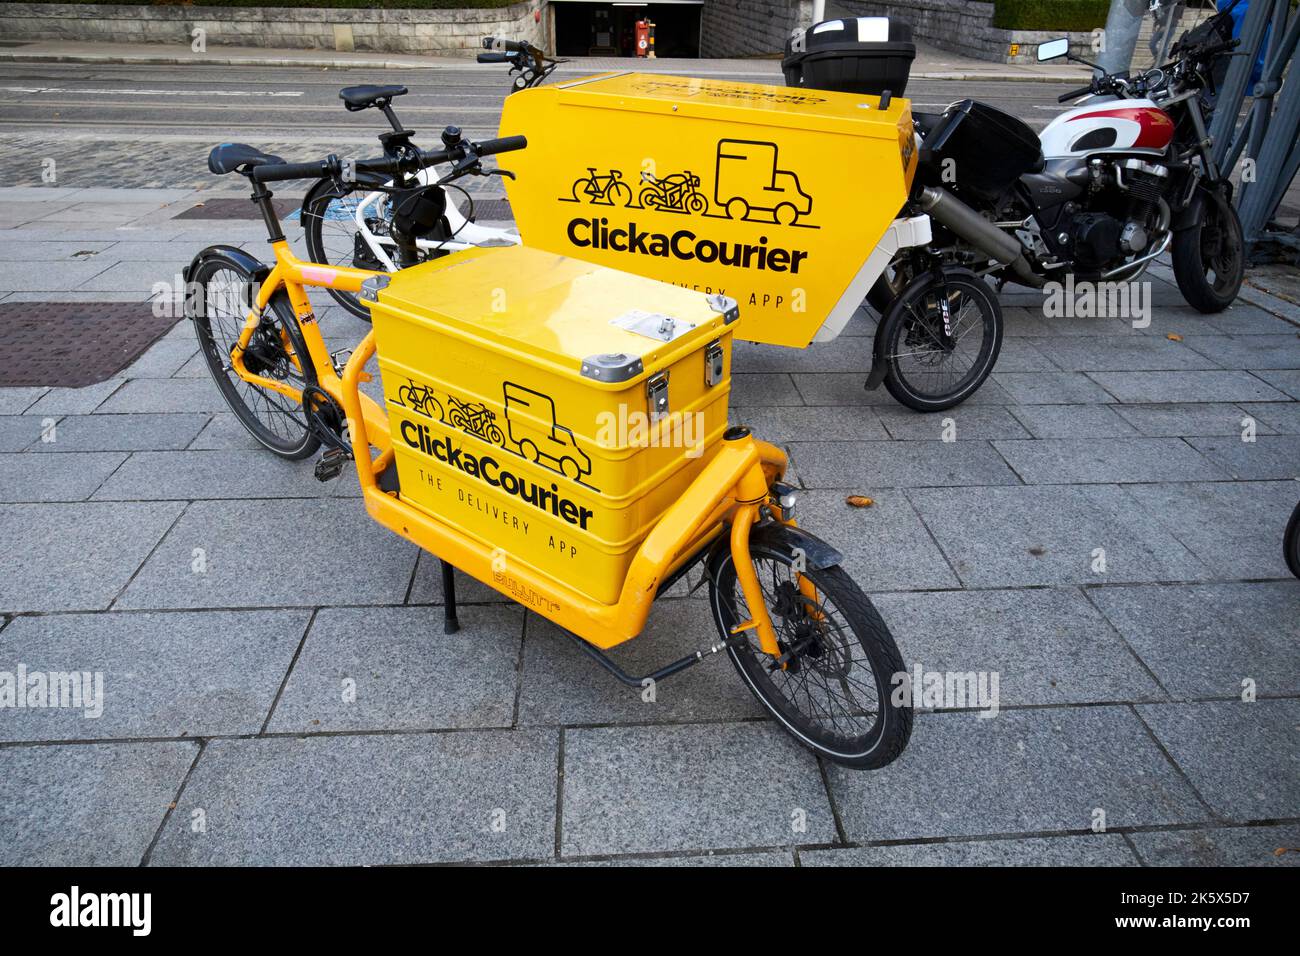 clickacourier mobile cycle couriers bikes parked in the financial district of dublin docklands dublin republic of ireland Stock Photo